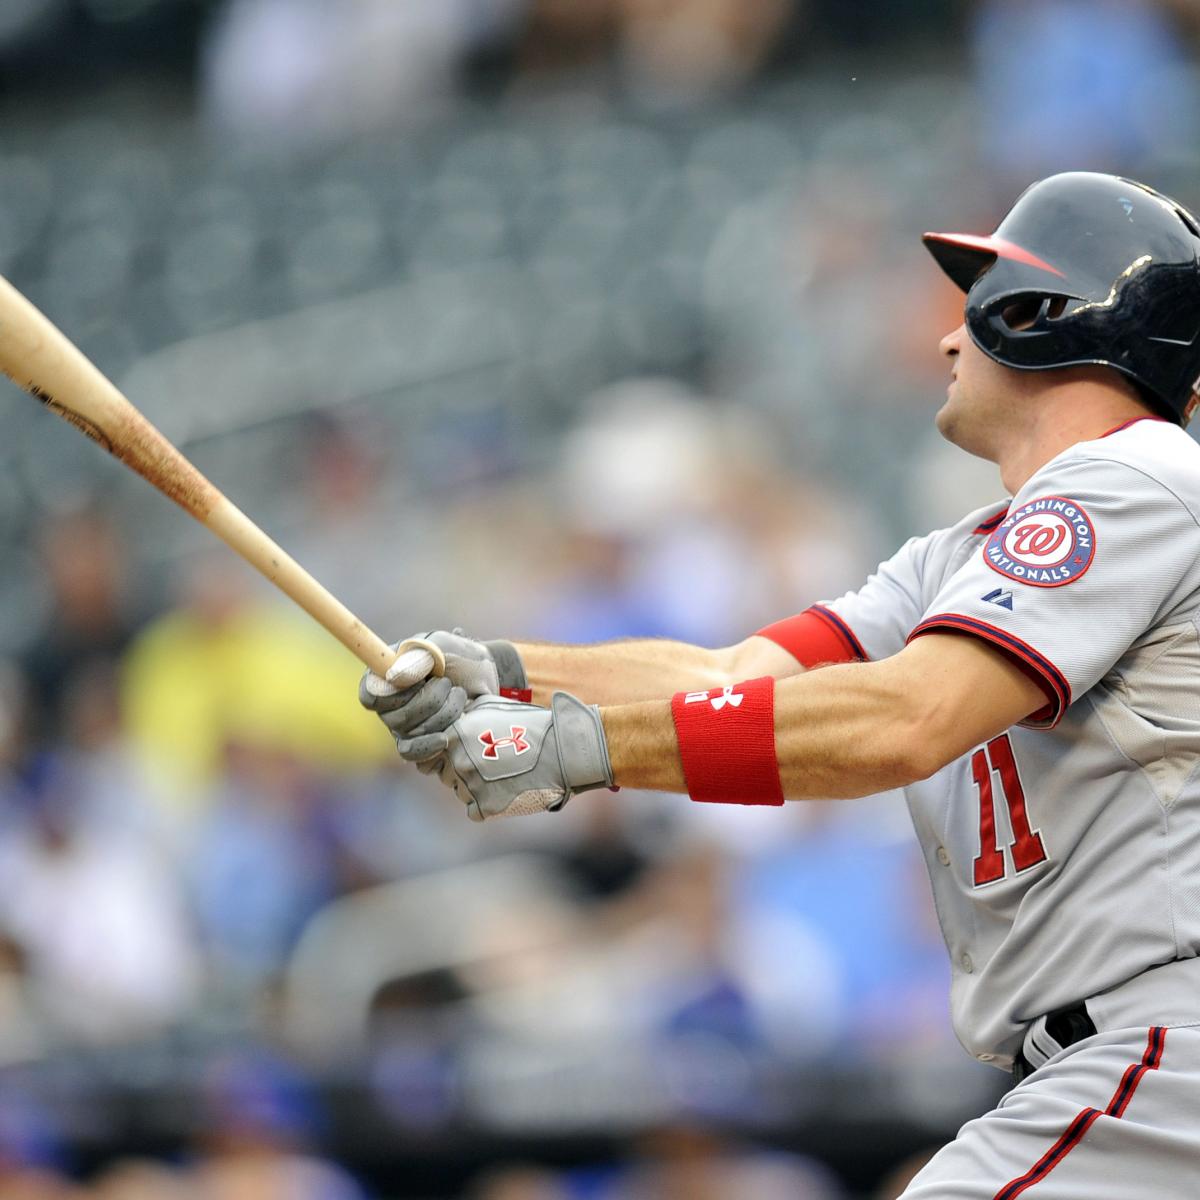 Fantasy Baseball Ranking the 11 Hottest Hitters for the Fantasy